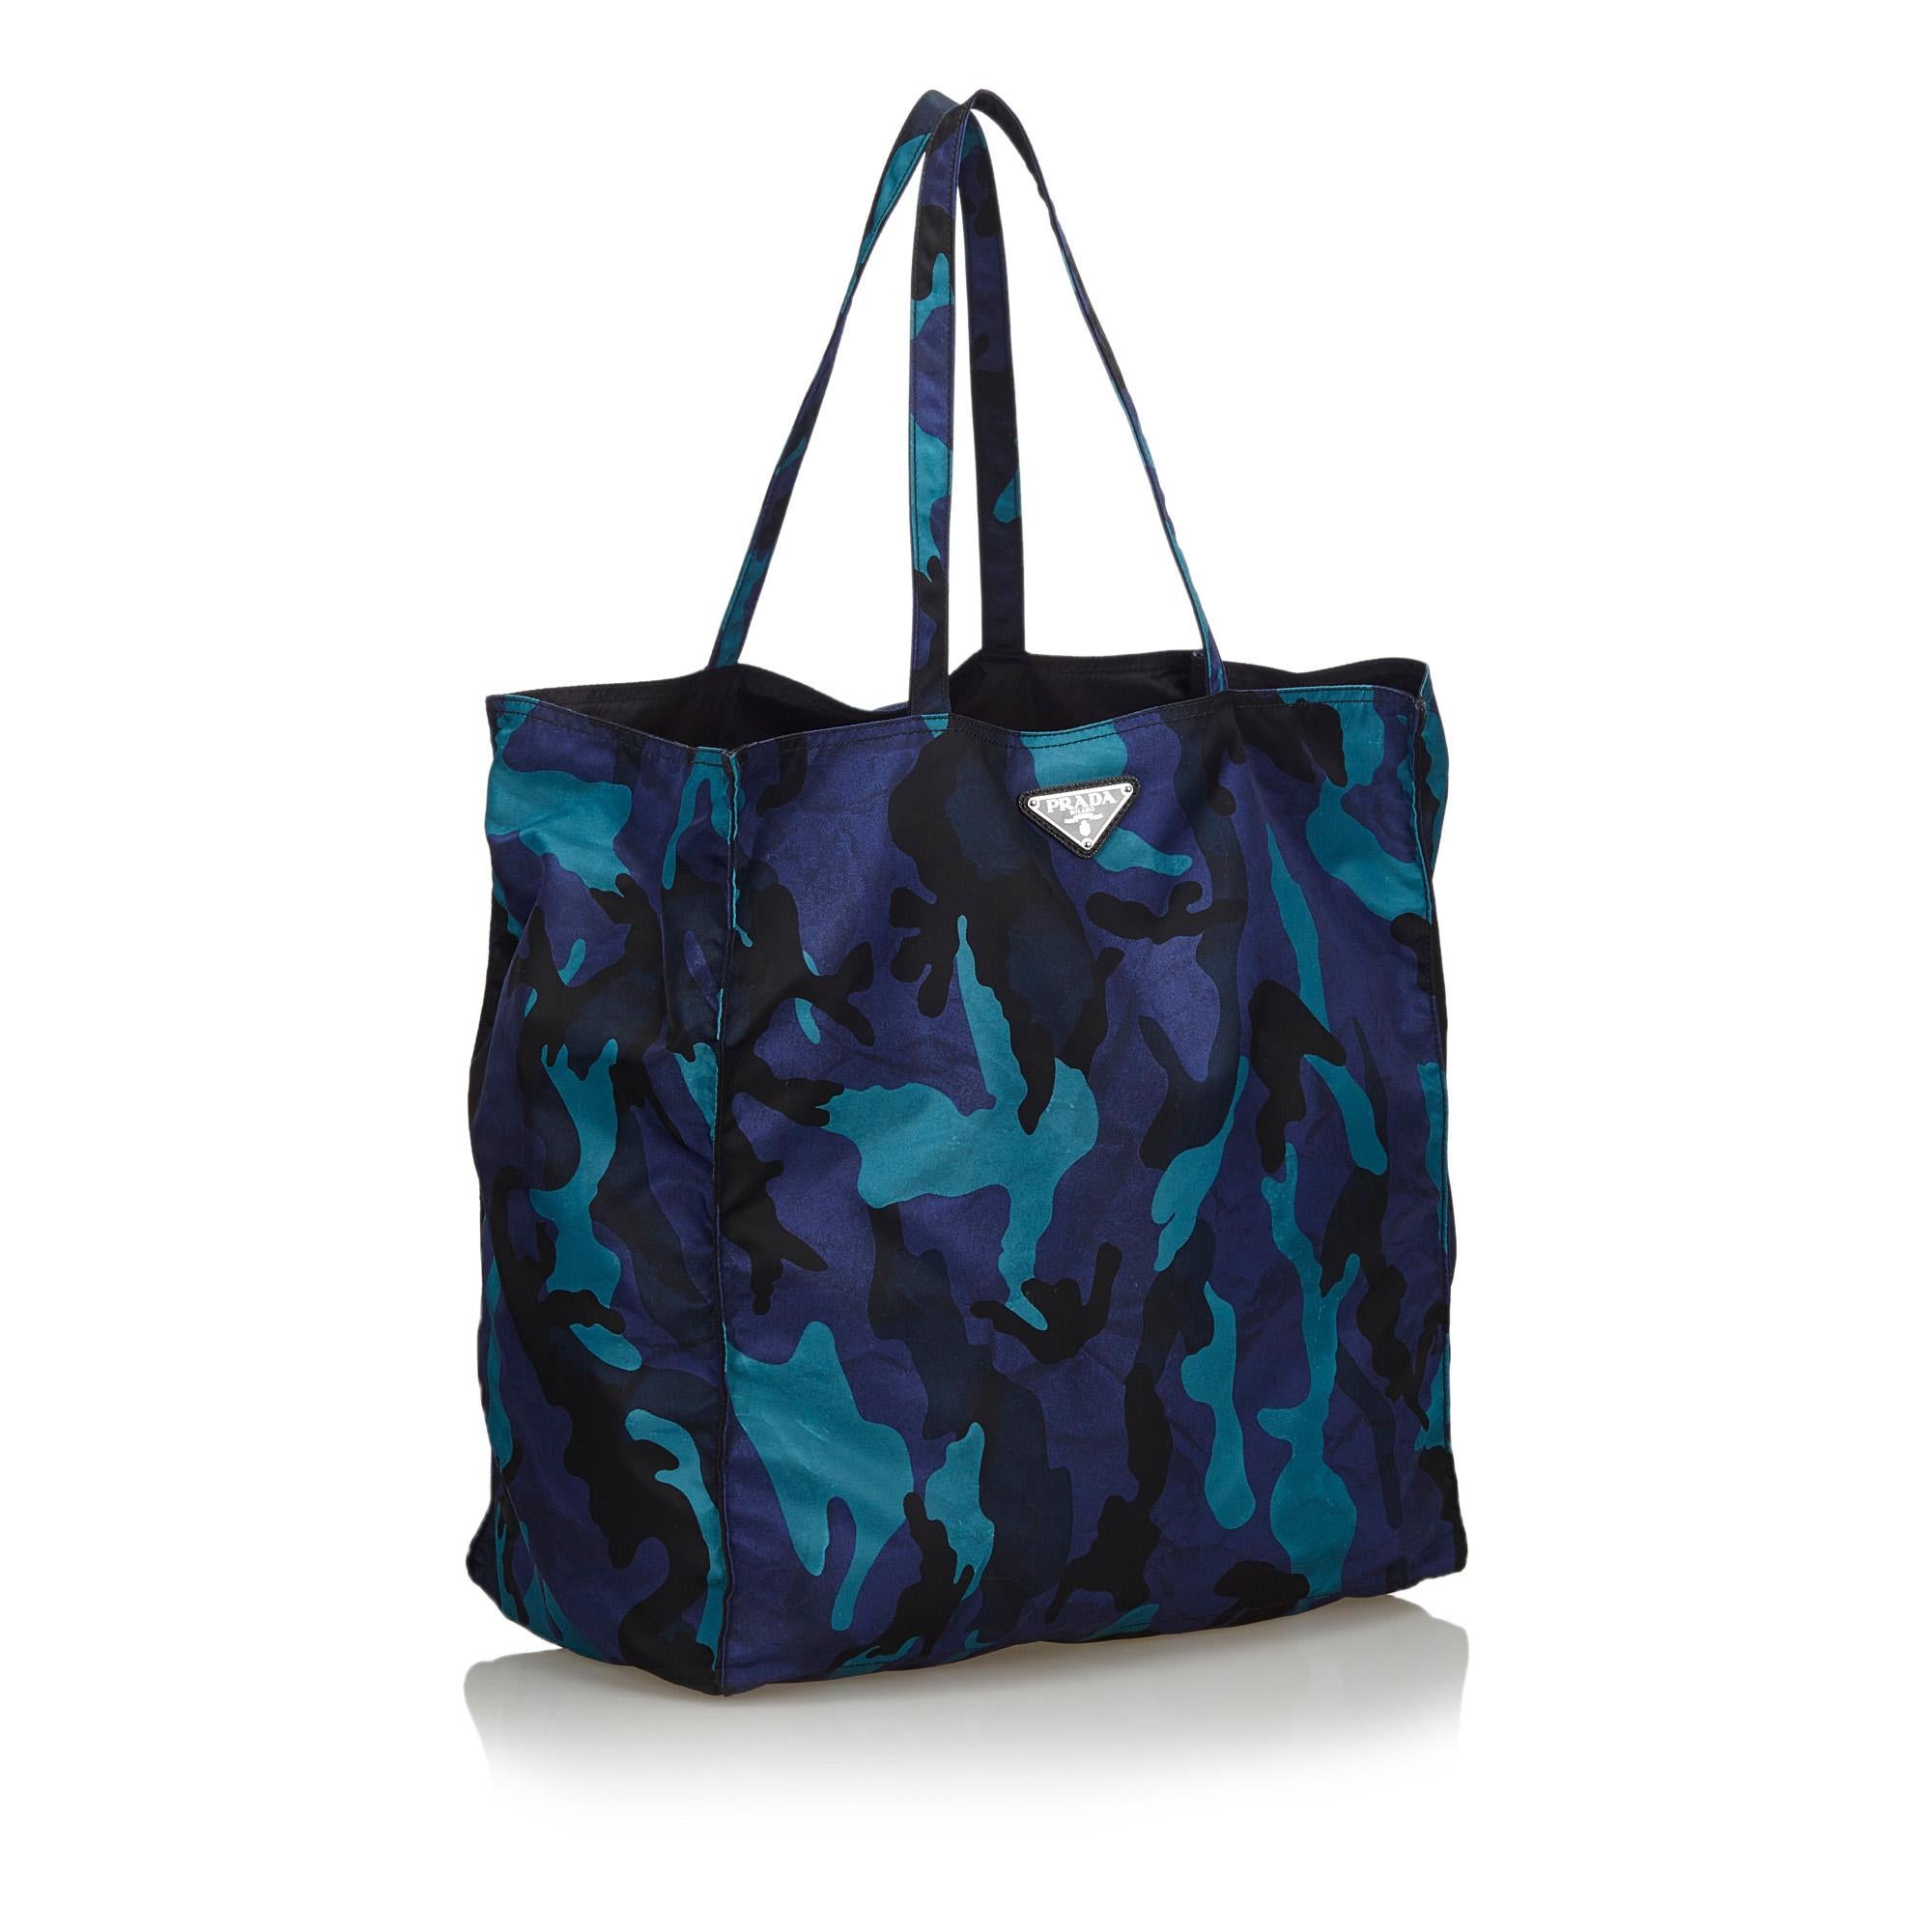 This tote bag features a printed nylon body, flat straps, an open top, and an interior zip pocket. It carries as B+ condition rating.

Inclusions: 
Dust Bag

Dimensions:
Length: 35.00 cm
Width: 35.00 cm
Depth: 19.00 cm
Hand Drop: 22.00 cm
Shoulder